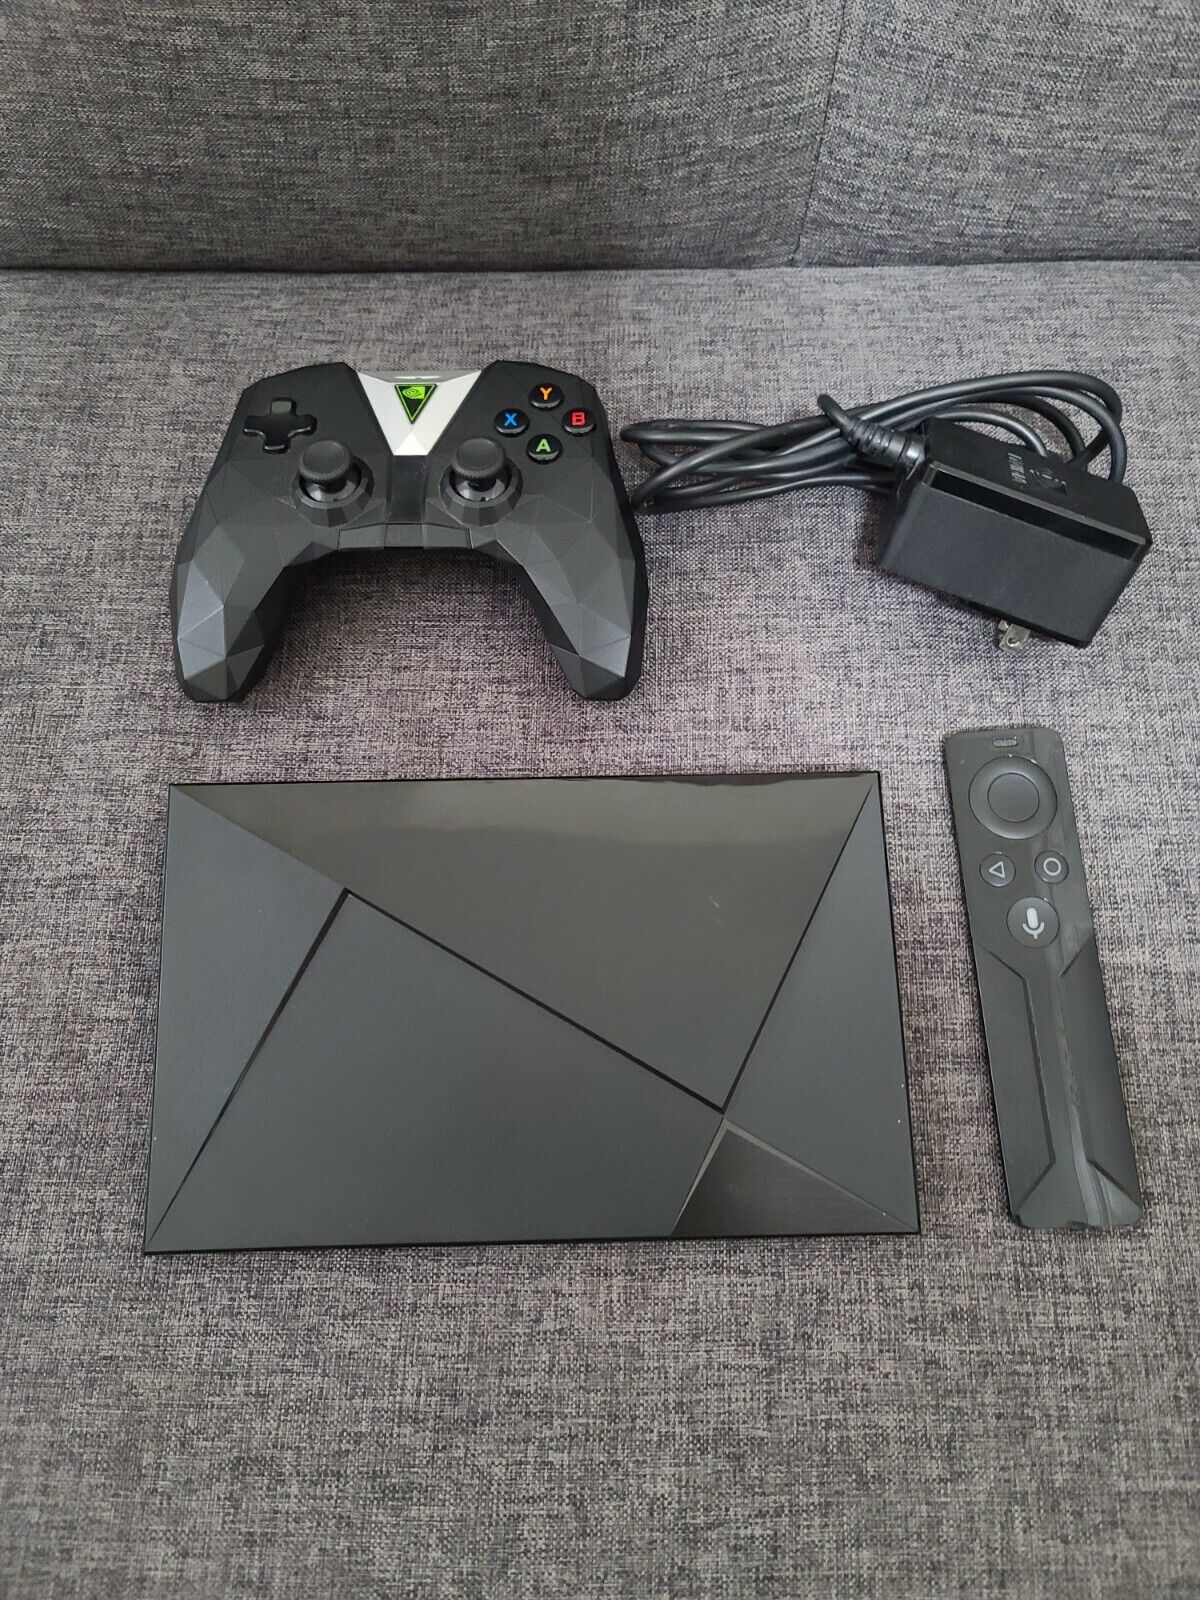 nvidia shield controller issues